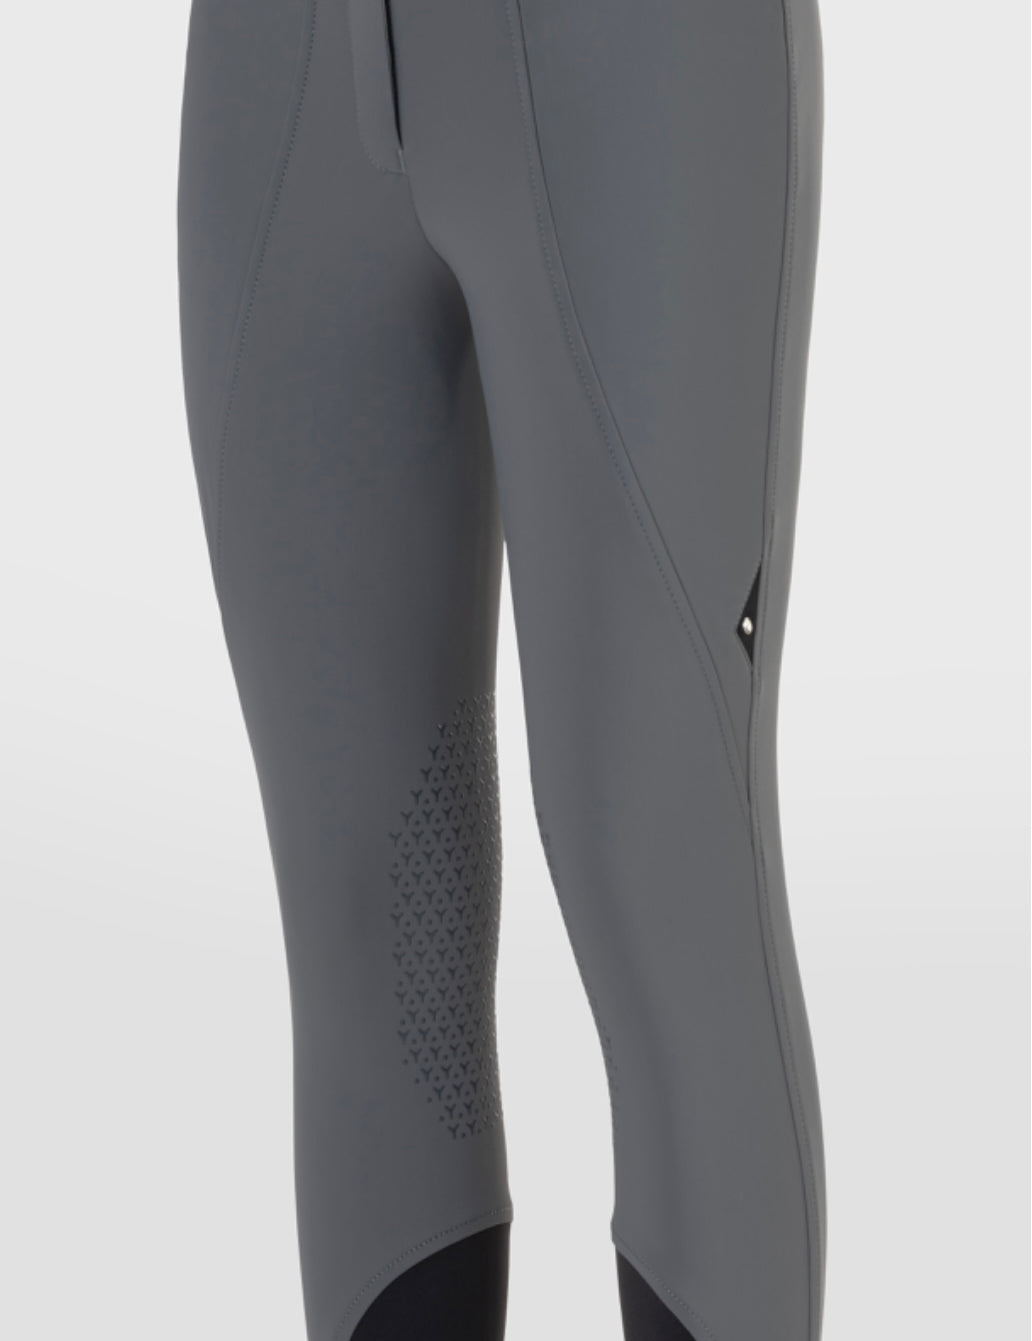 Equiline EsiceKH High Rise Breeches in B-Move Light